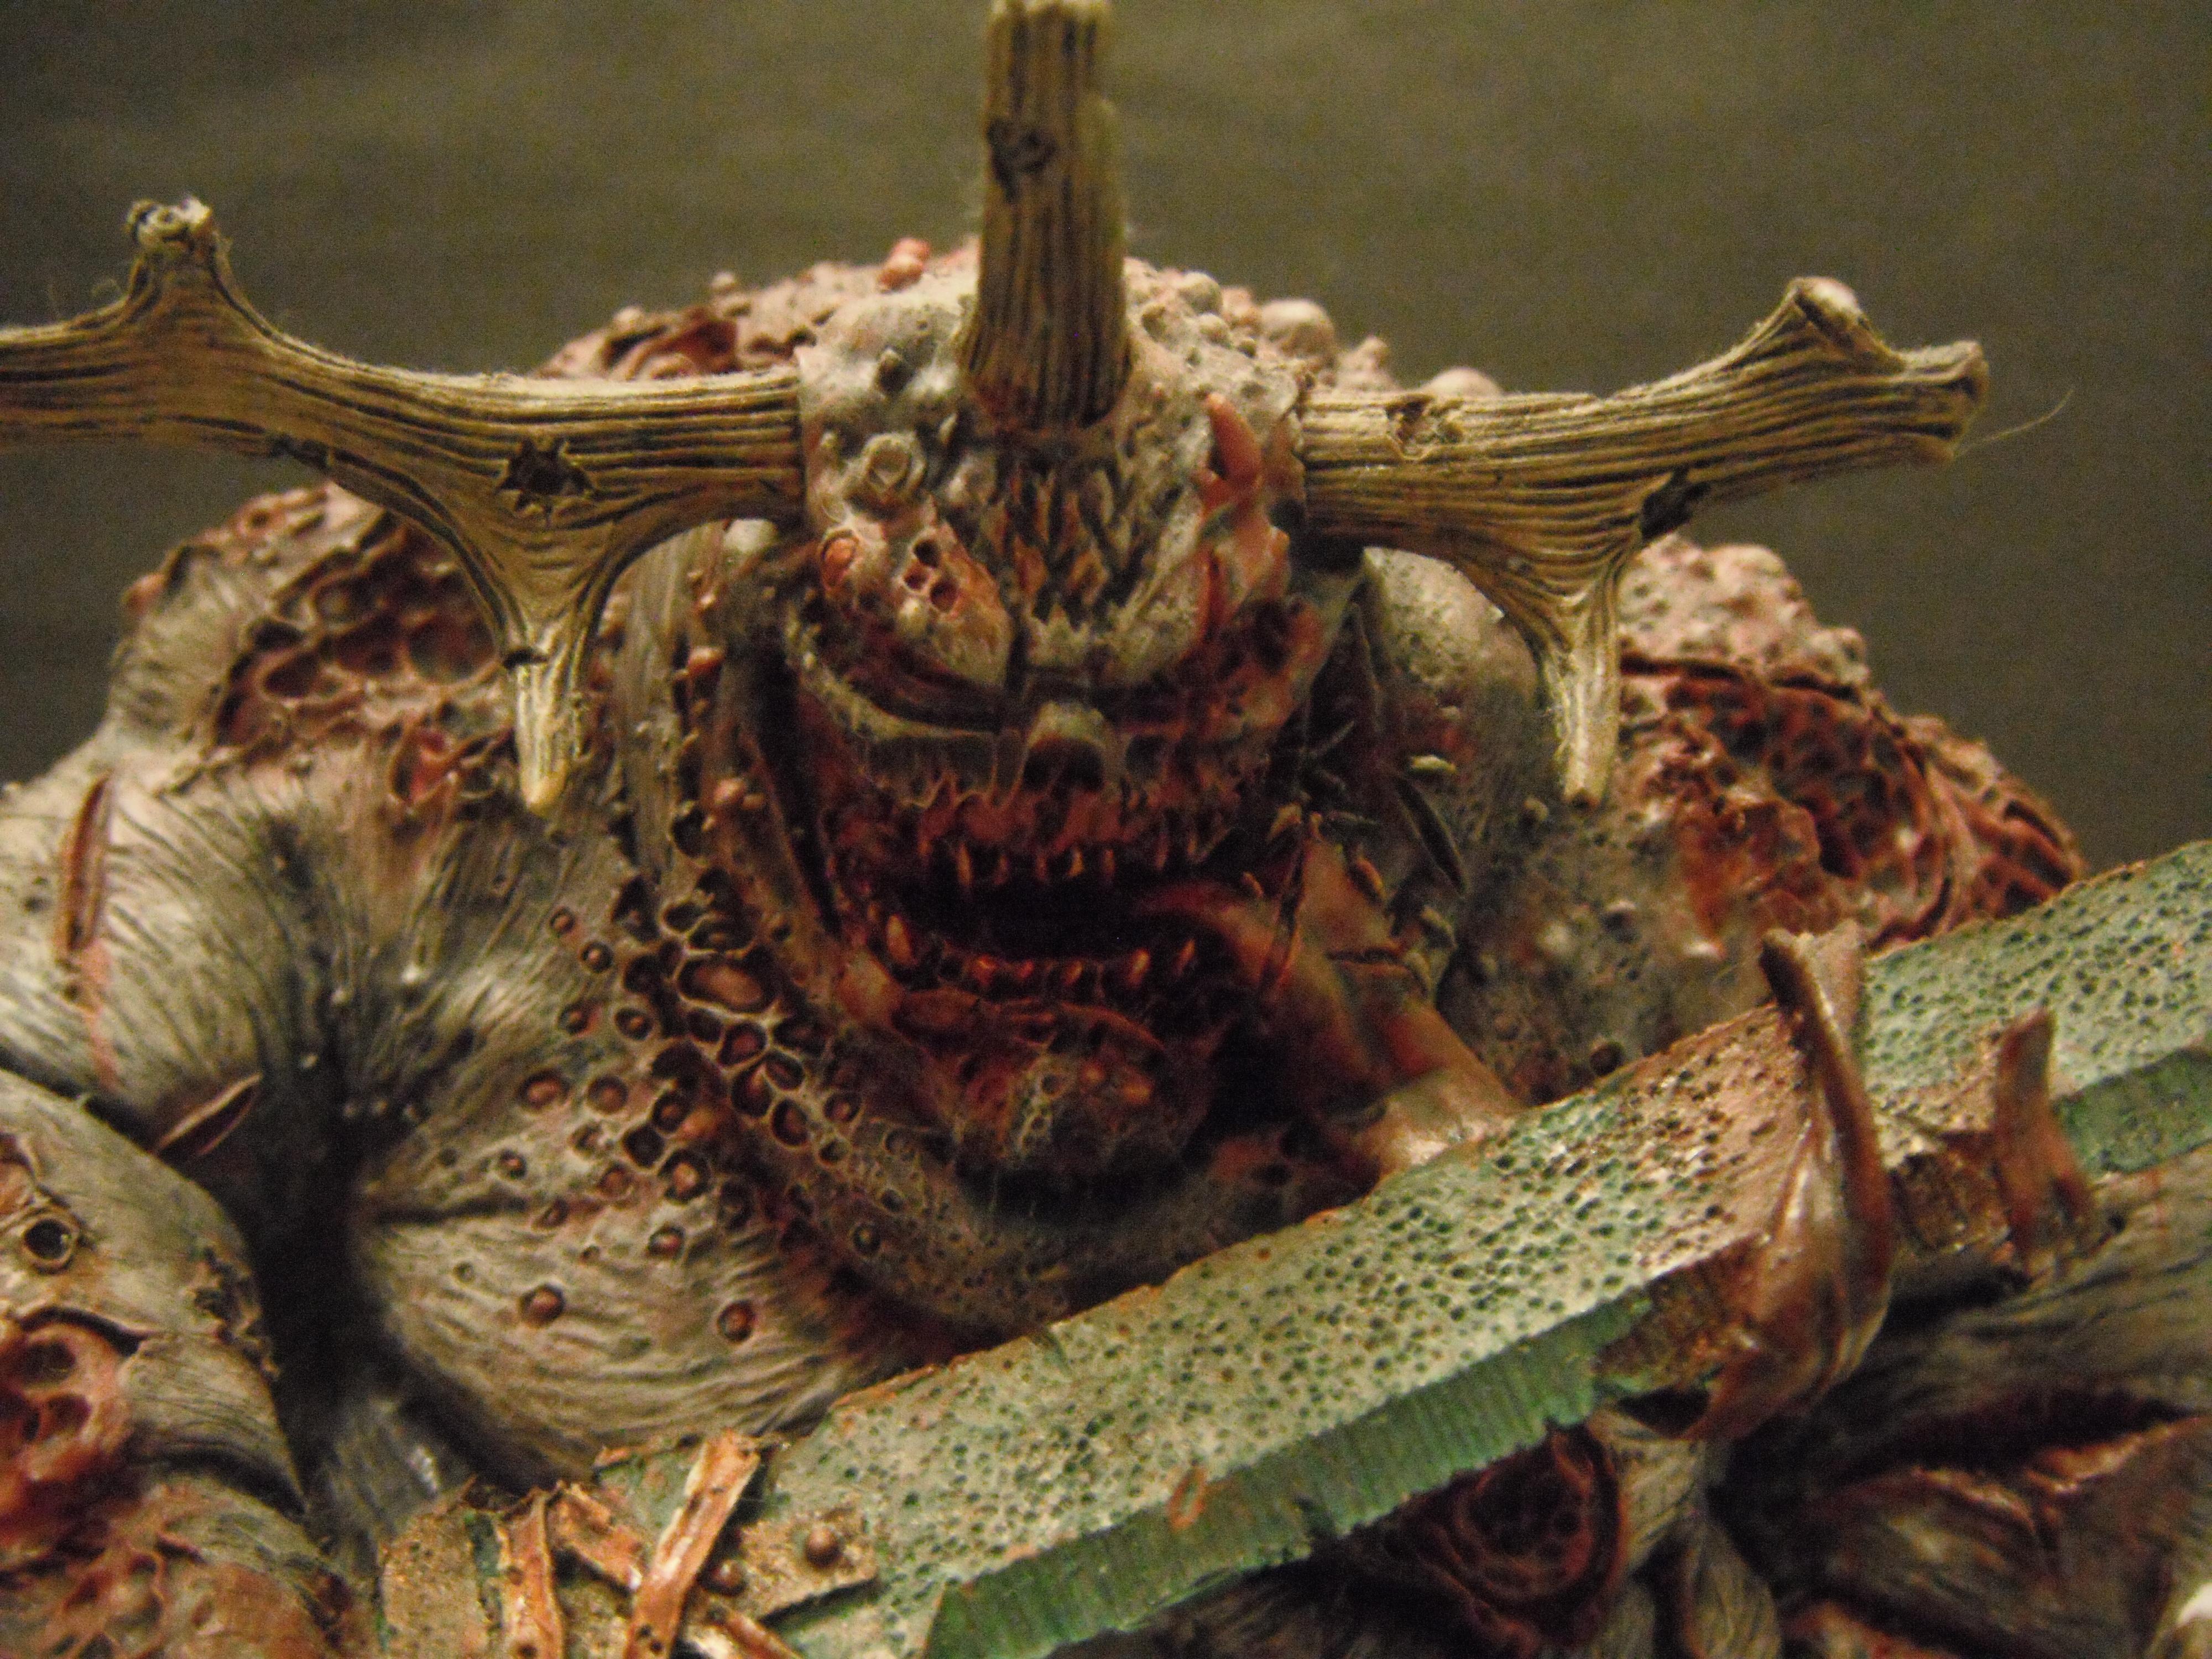 Chaos, Chaos Daemons, Forge World Nurgle Great Unclean One, Nurgle, Nurgle Daemons, Skabithrax